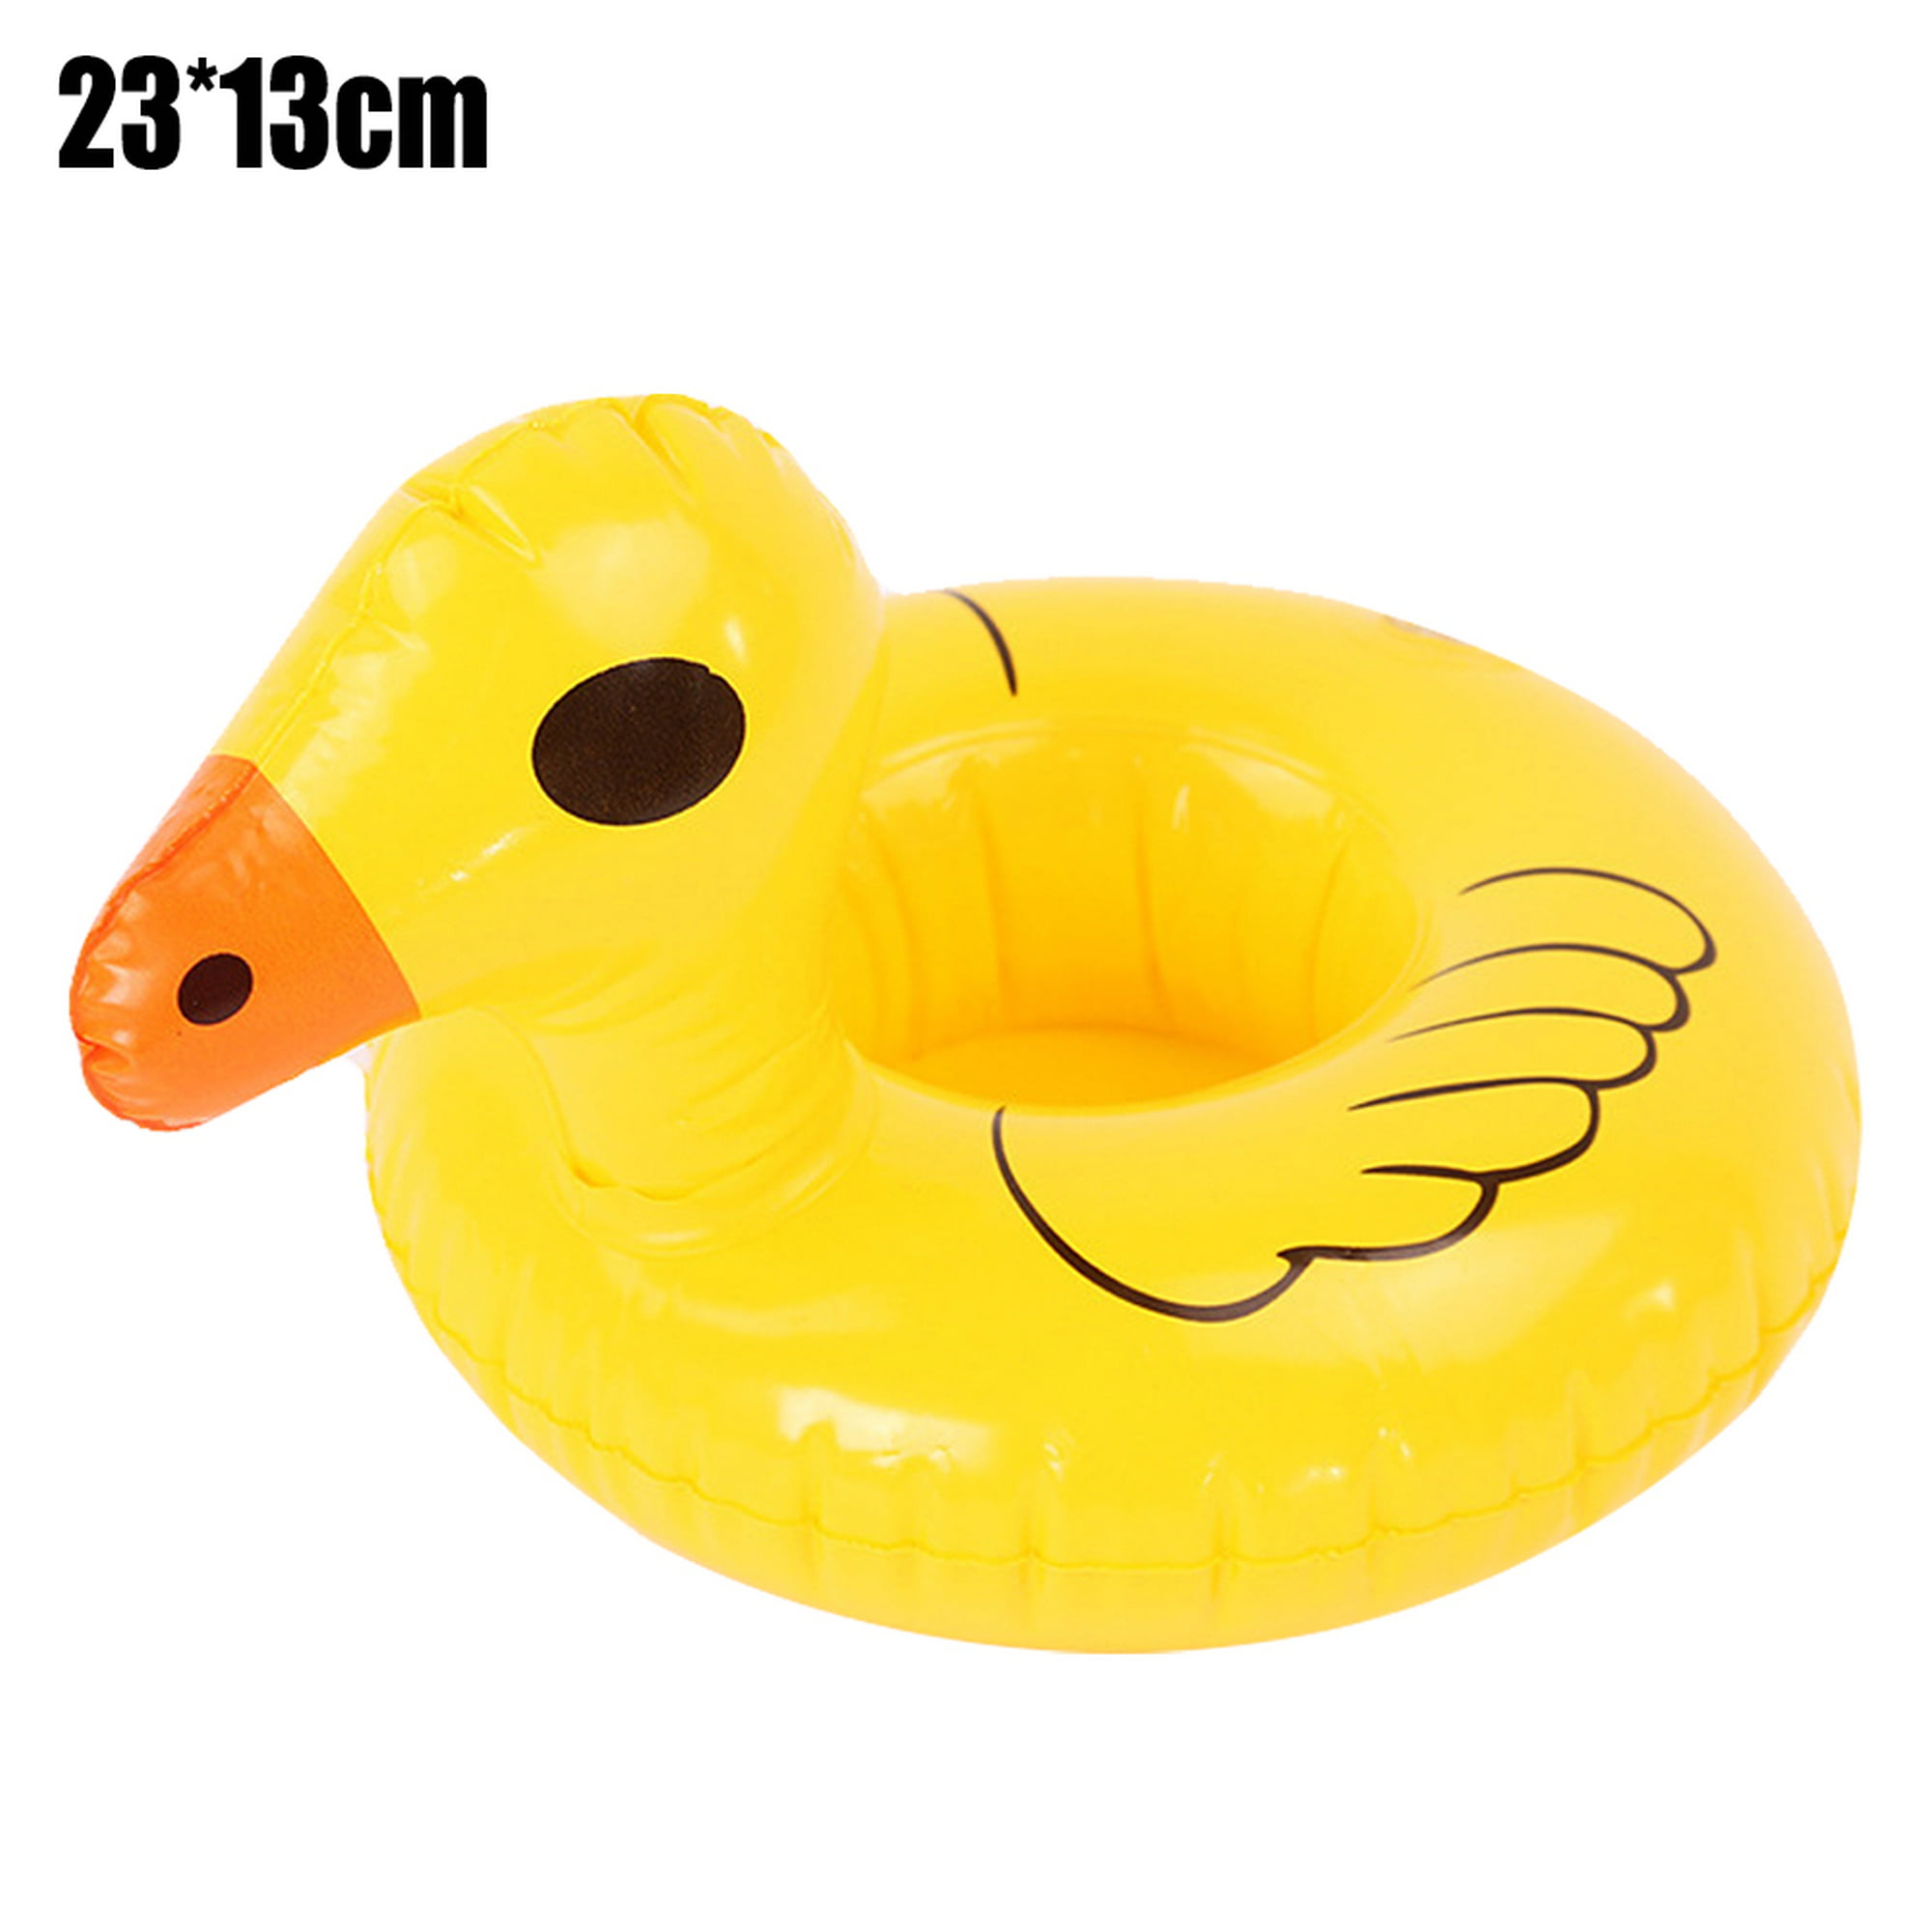 Details about   Inflatable Cup Holder Drink Floating Beach Pool Party Can Swimming Hot Tub Toy. 